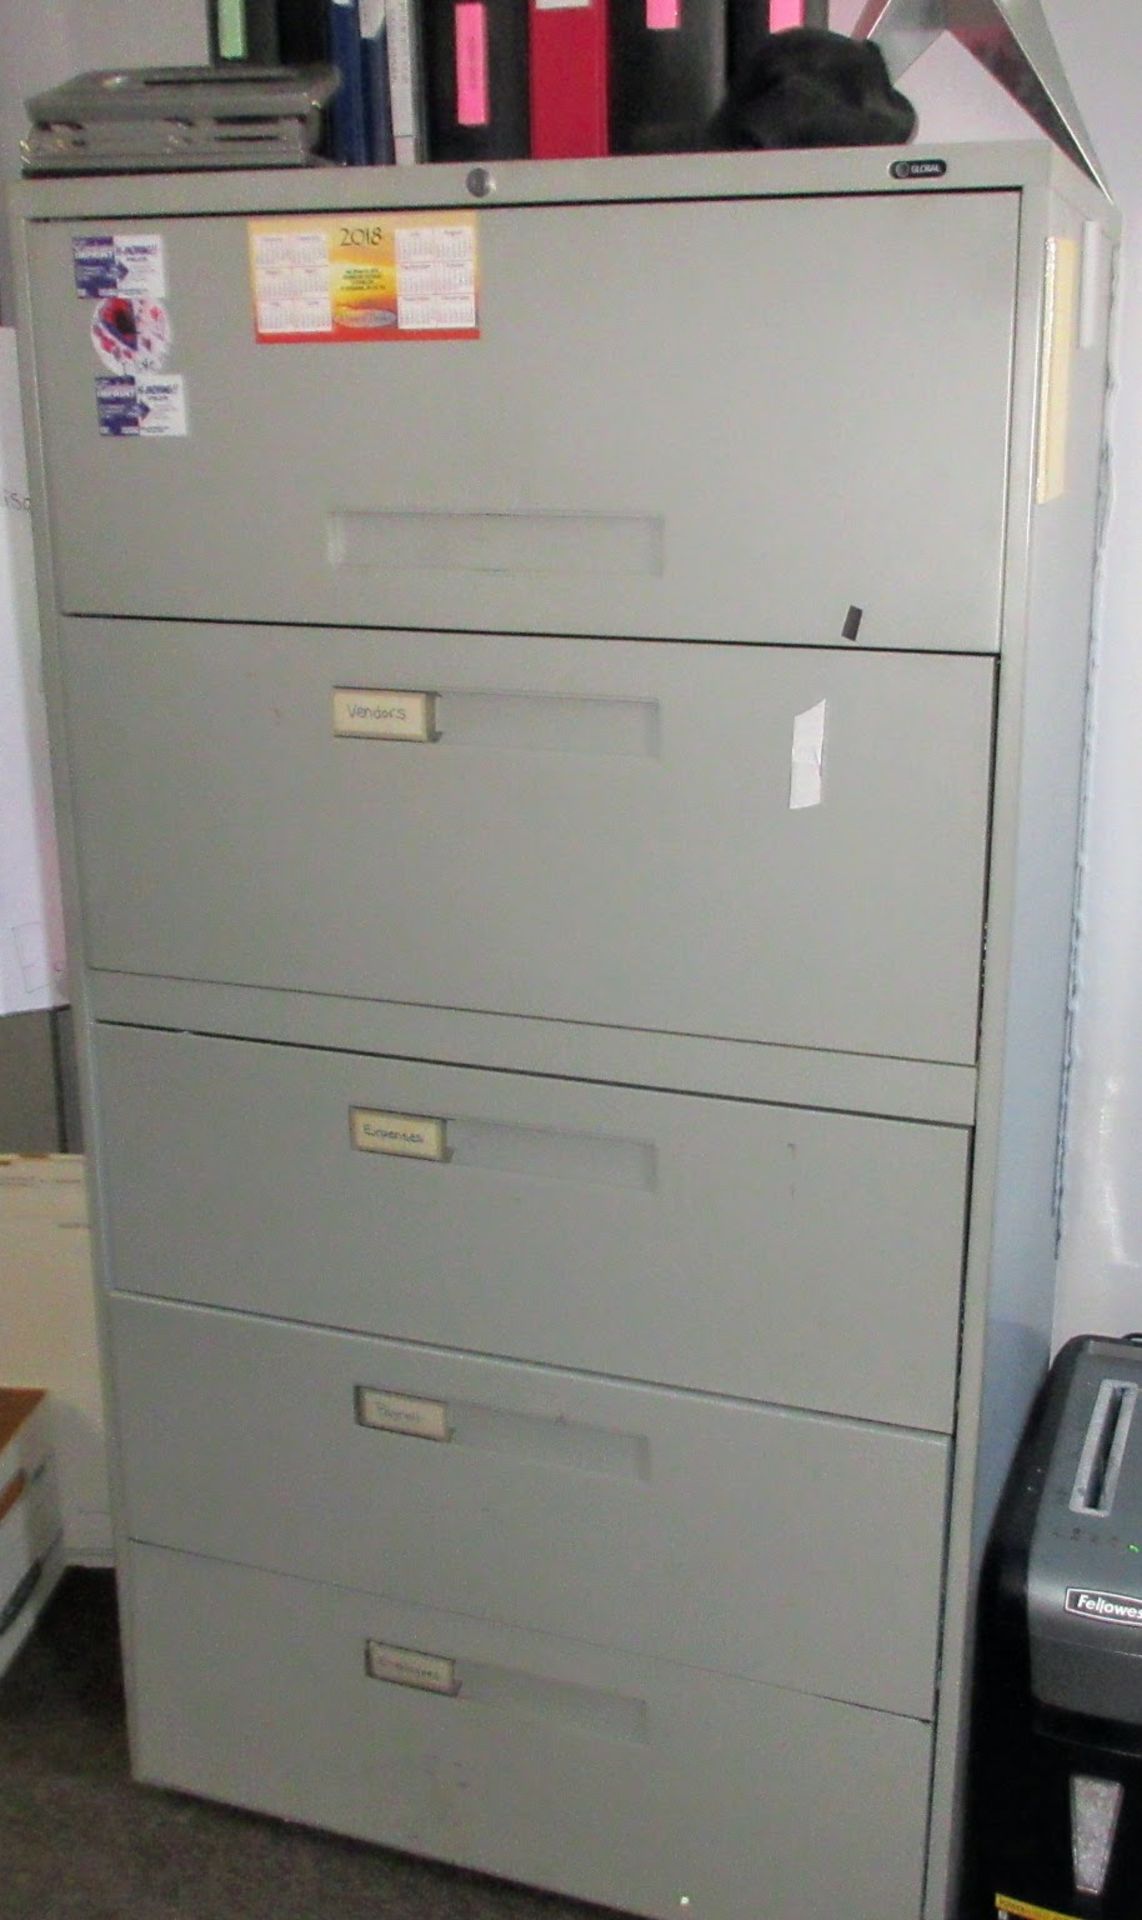 LOT (2) DESKS (1 L-SHAPED), (2) FILE CABINETS, (2) CHAIRS) - Image 4 of 4